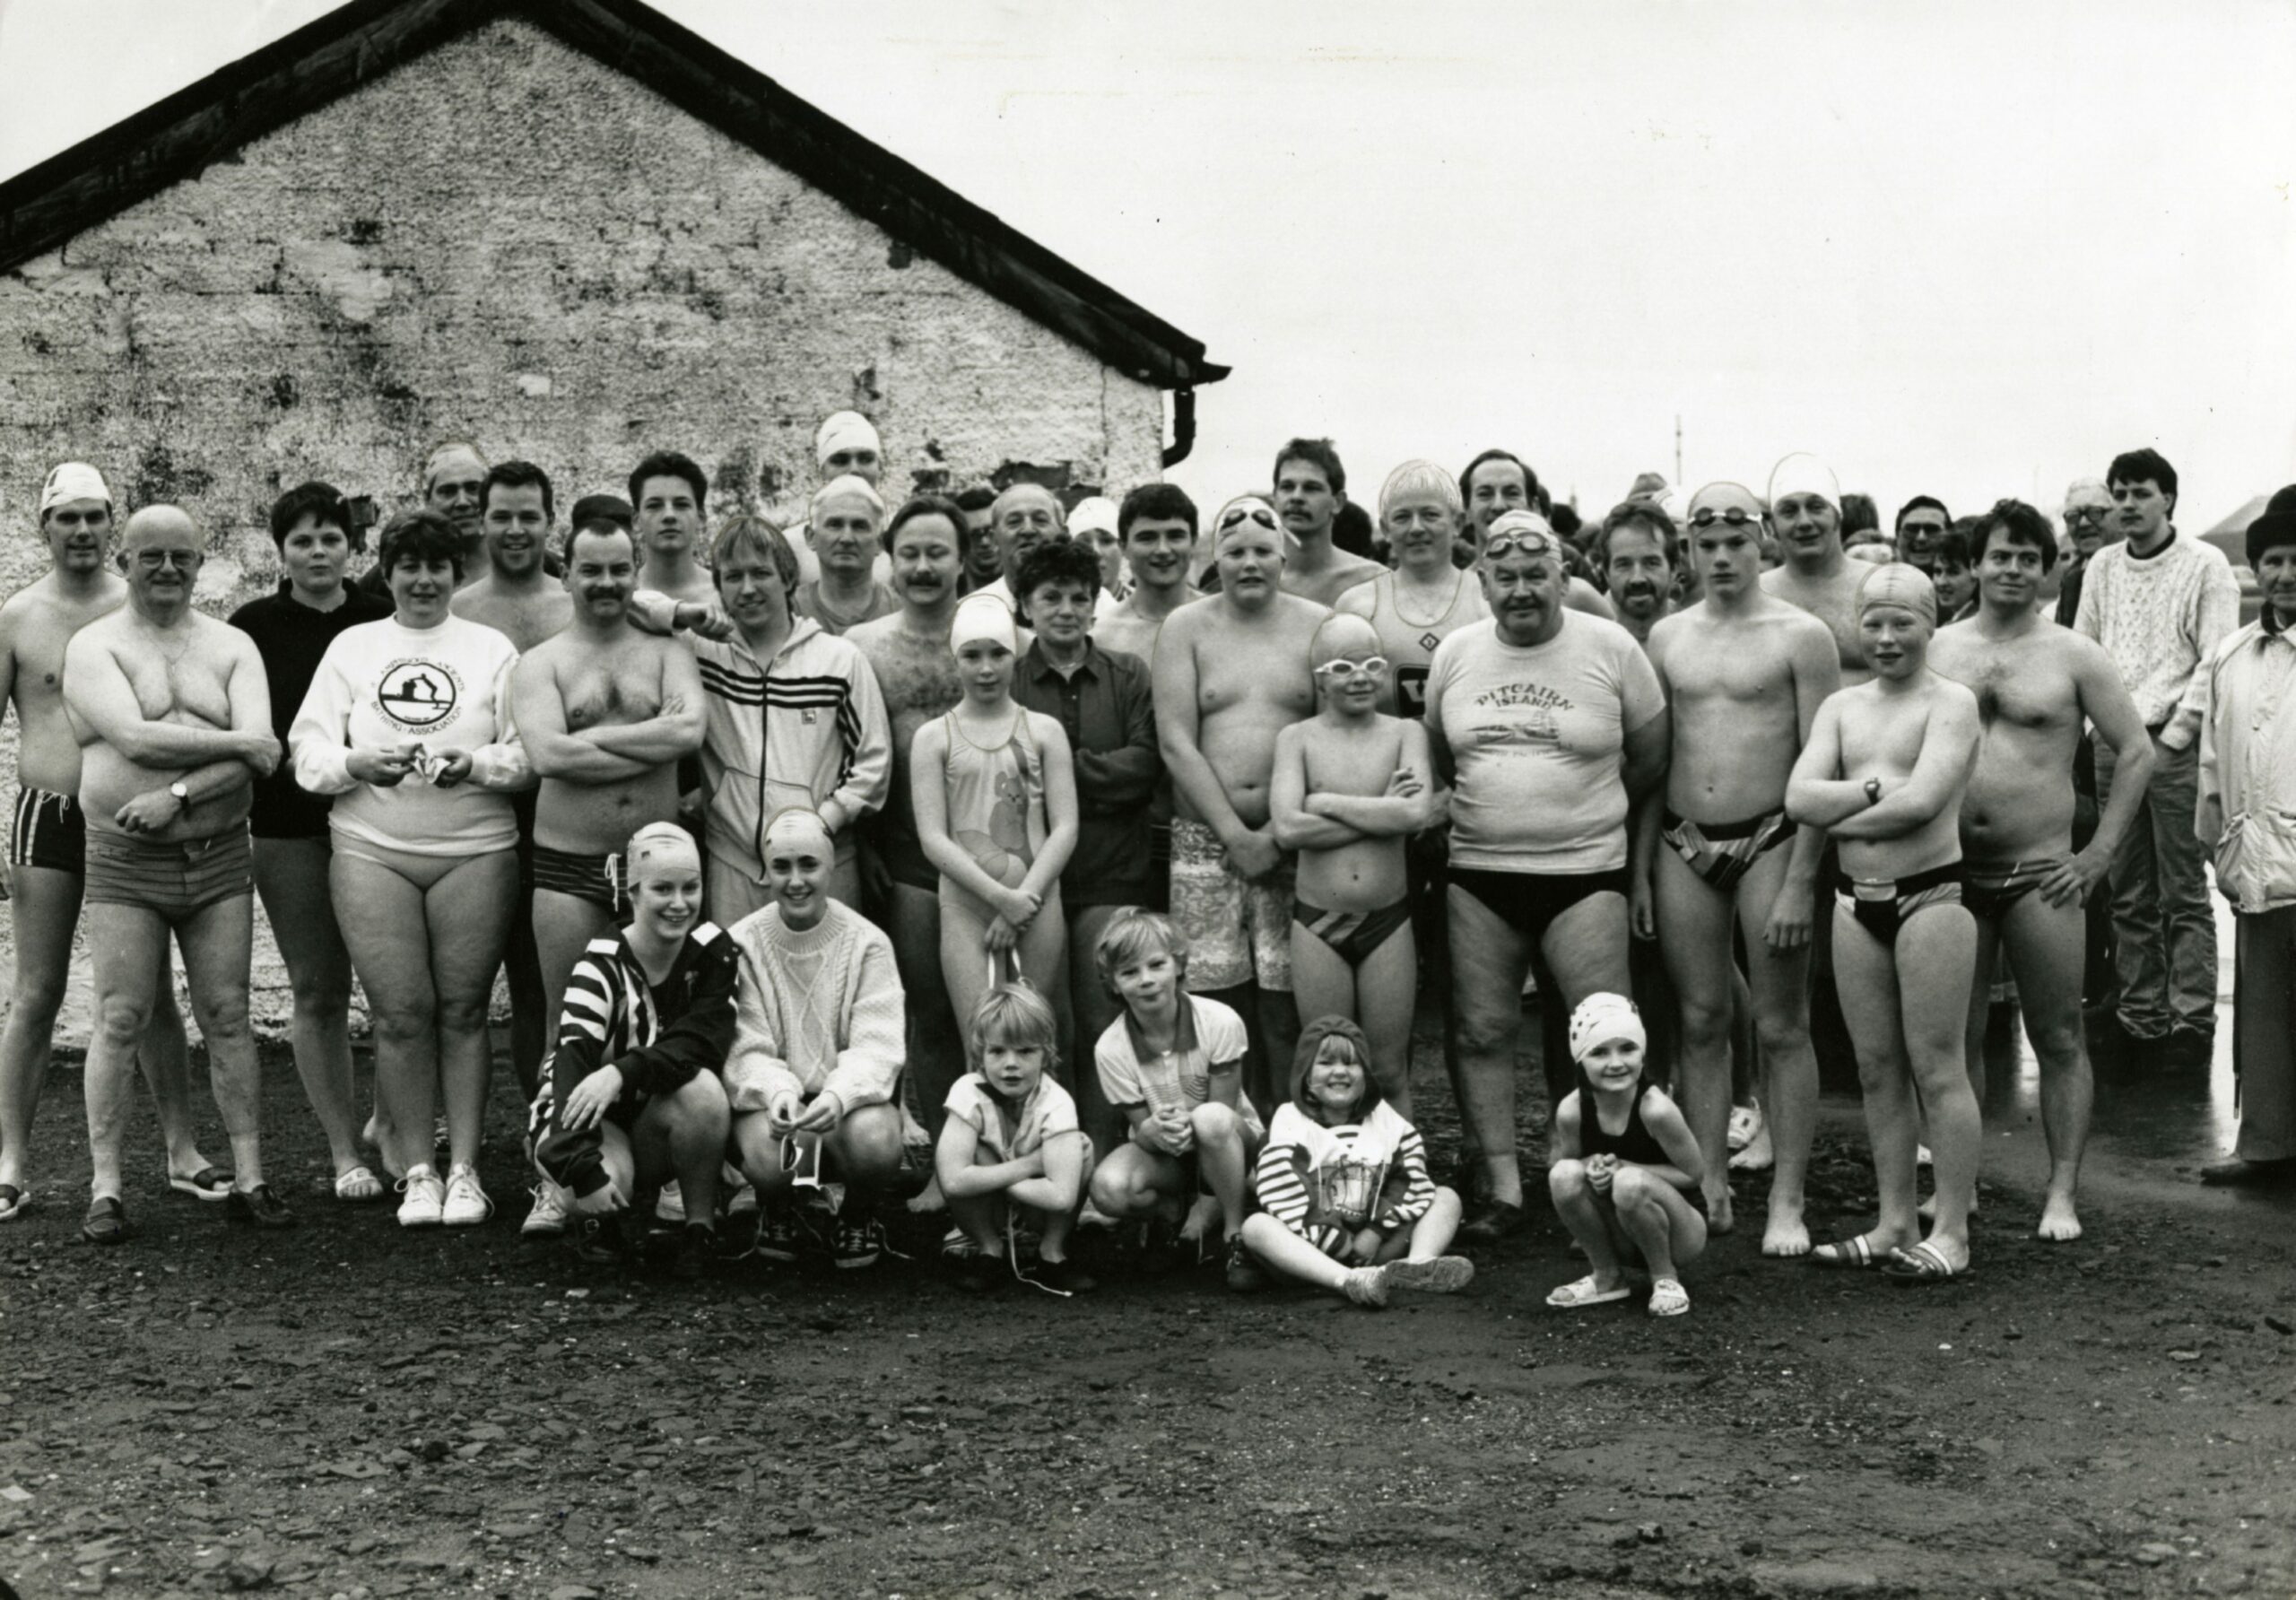 Black and white photo of the The Phibbies swimming club in 1990.